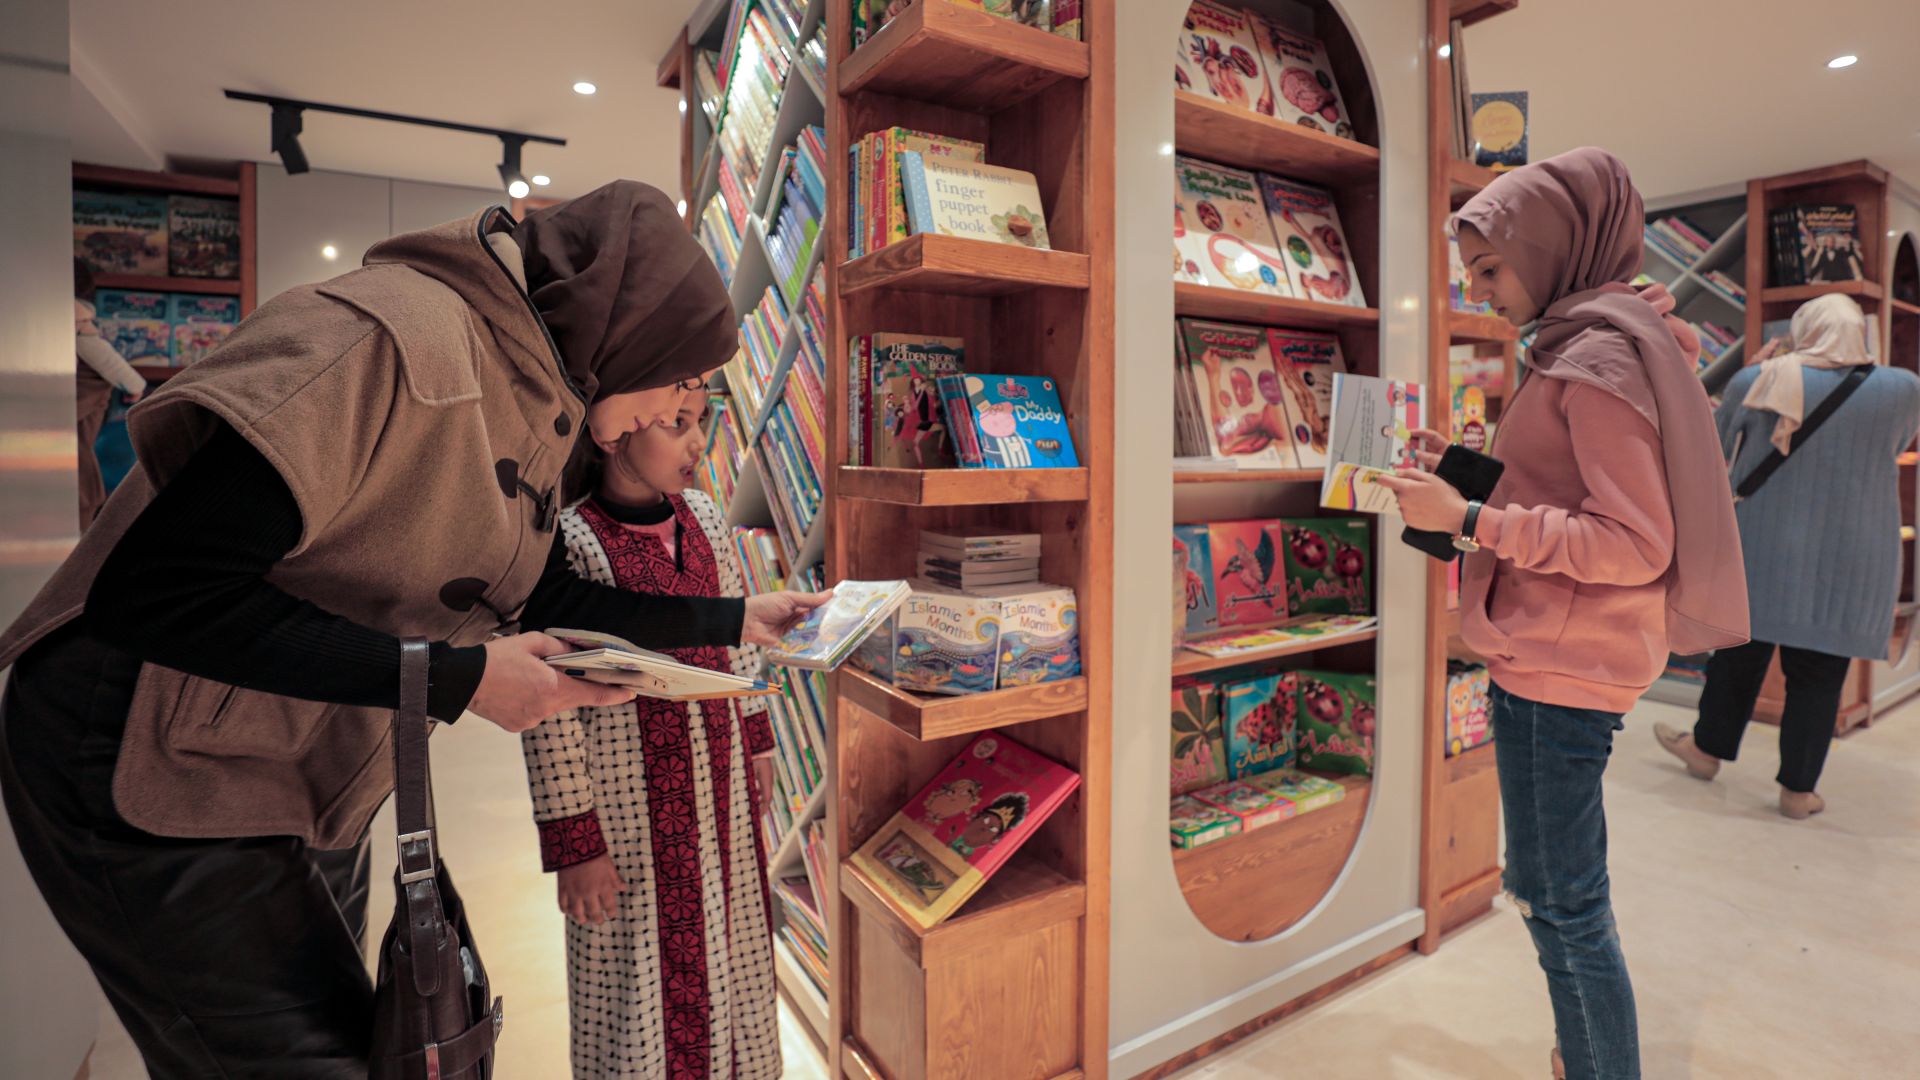 People browse in a bookstore